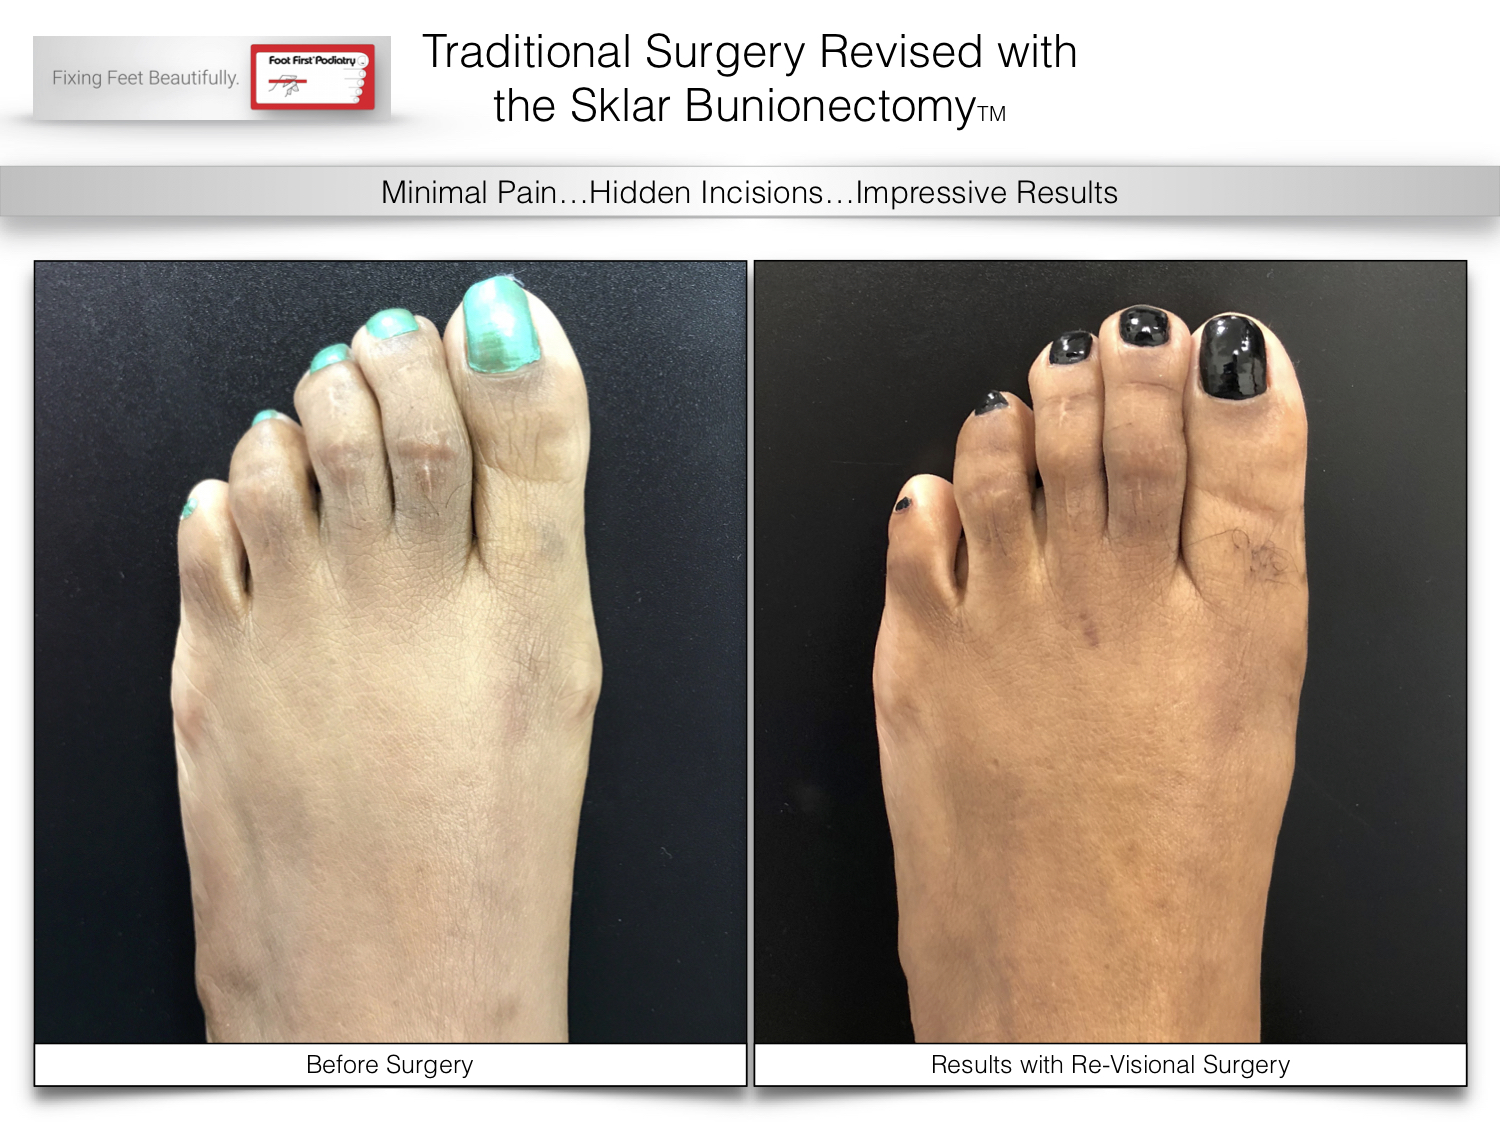 Is It Finally Time To Consider Bunion Surgery?